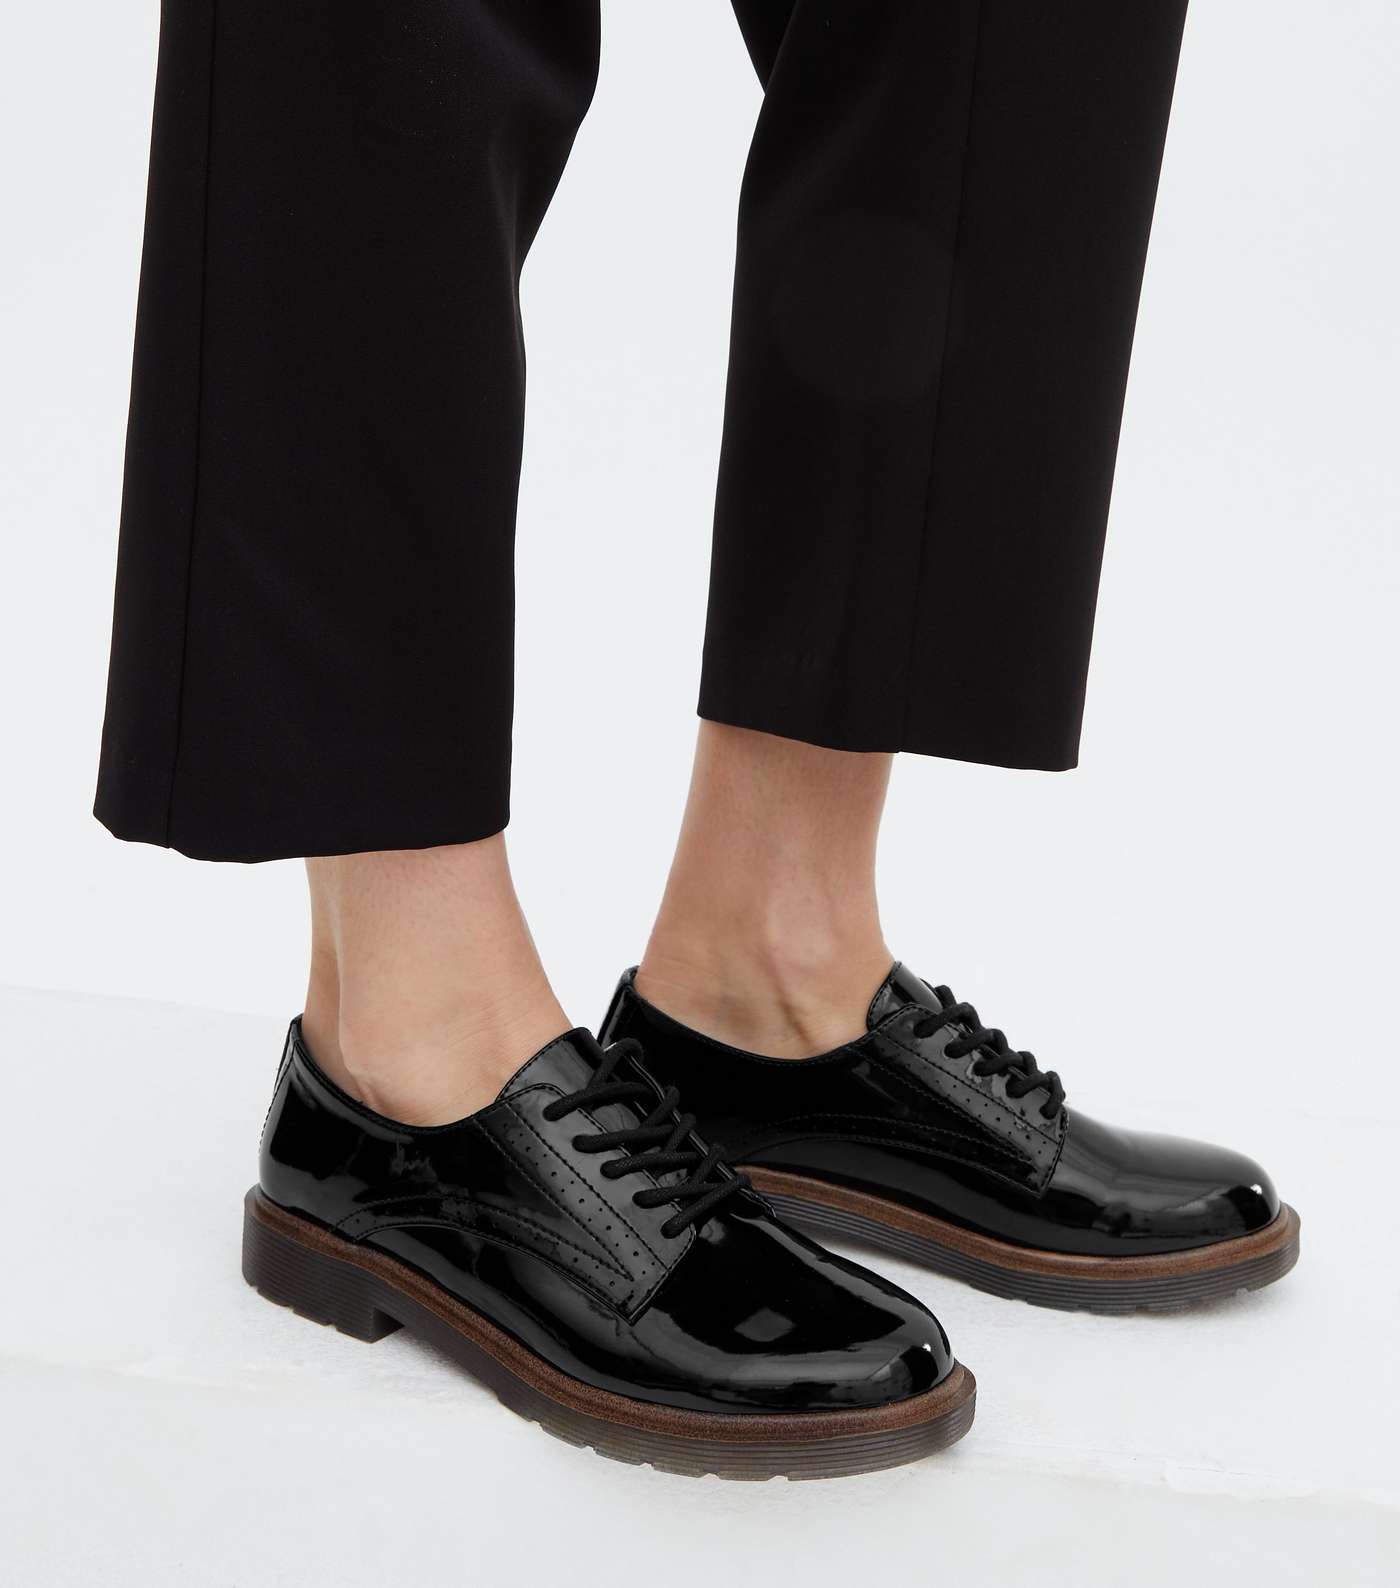 Girls Black Patent Lace Up Chunky Brogues Image 2